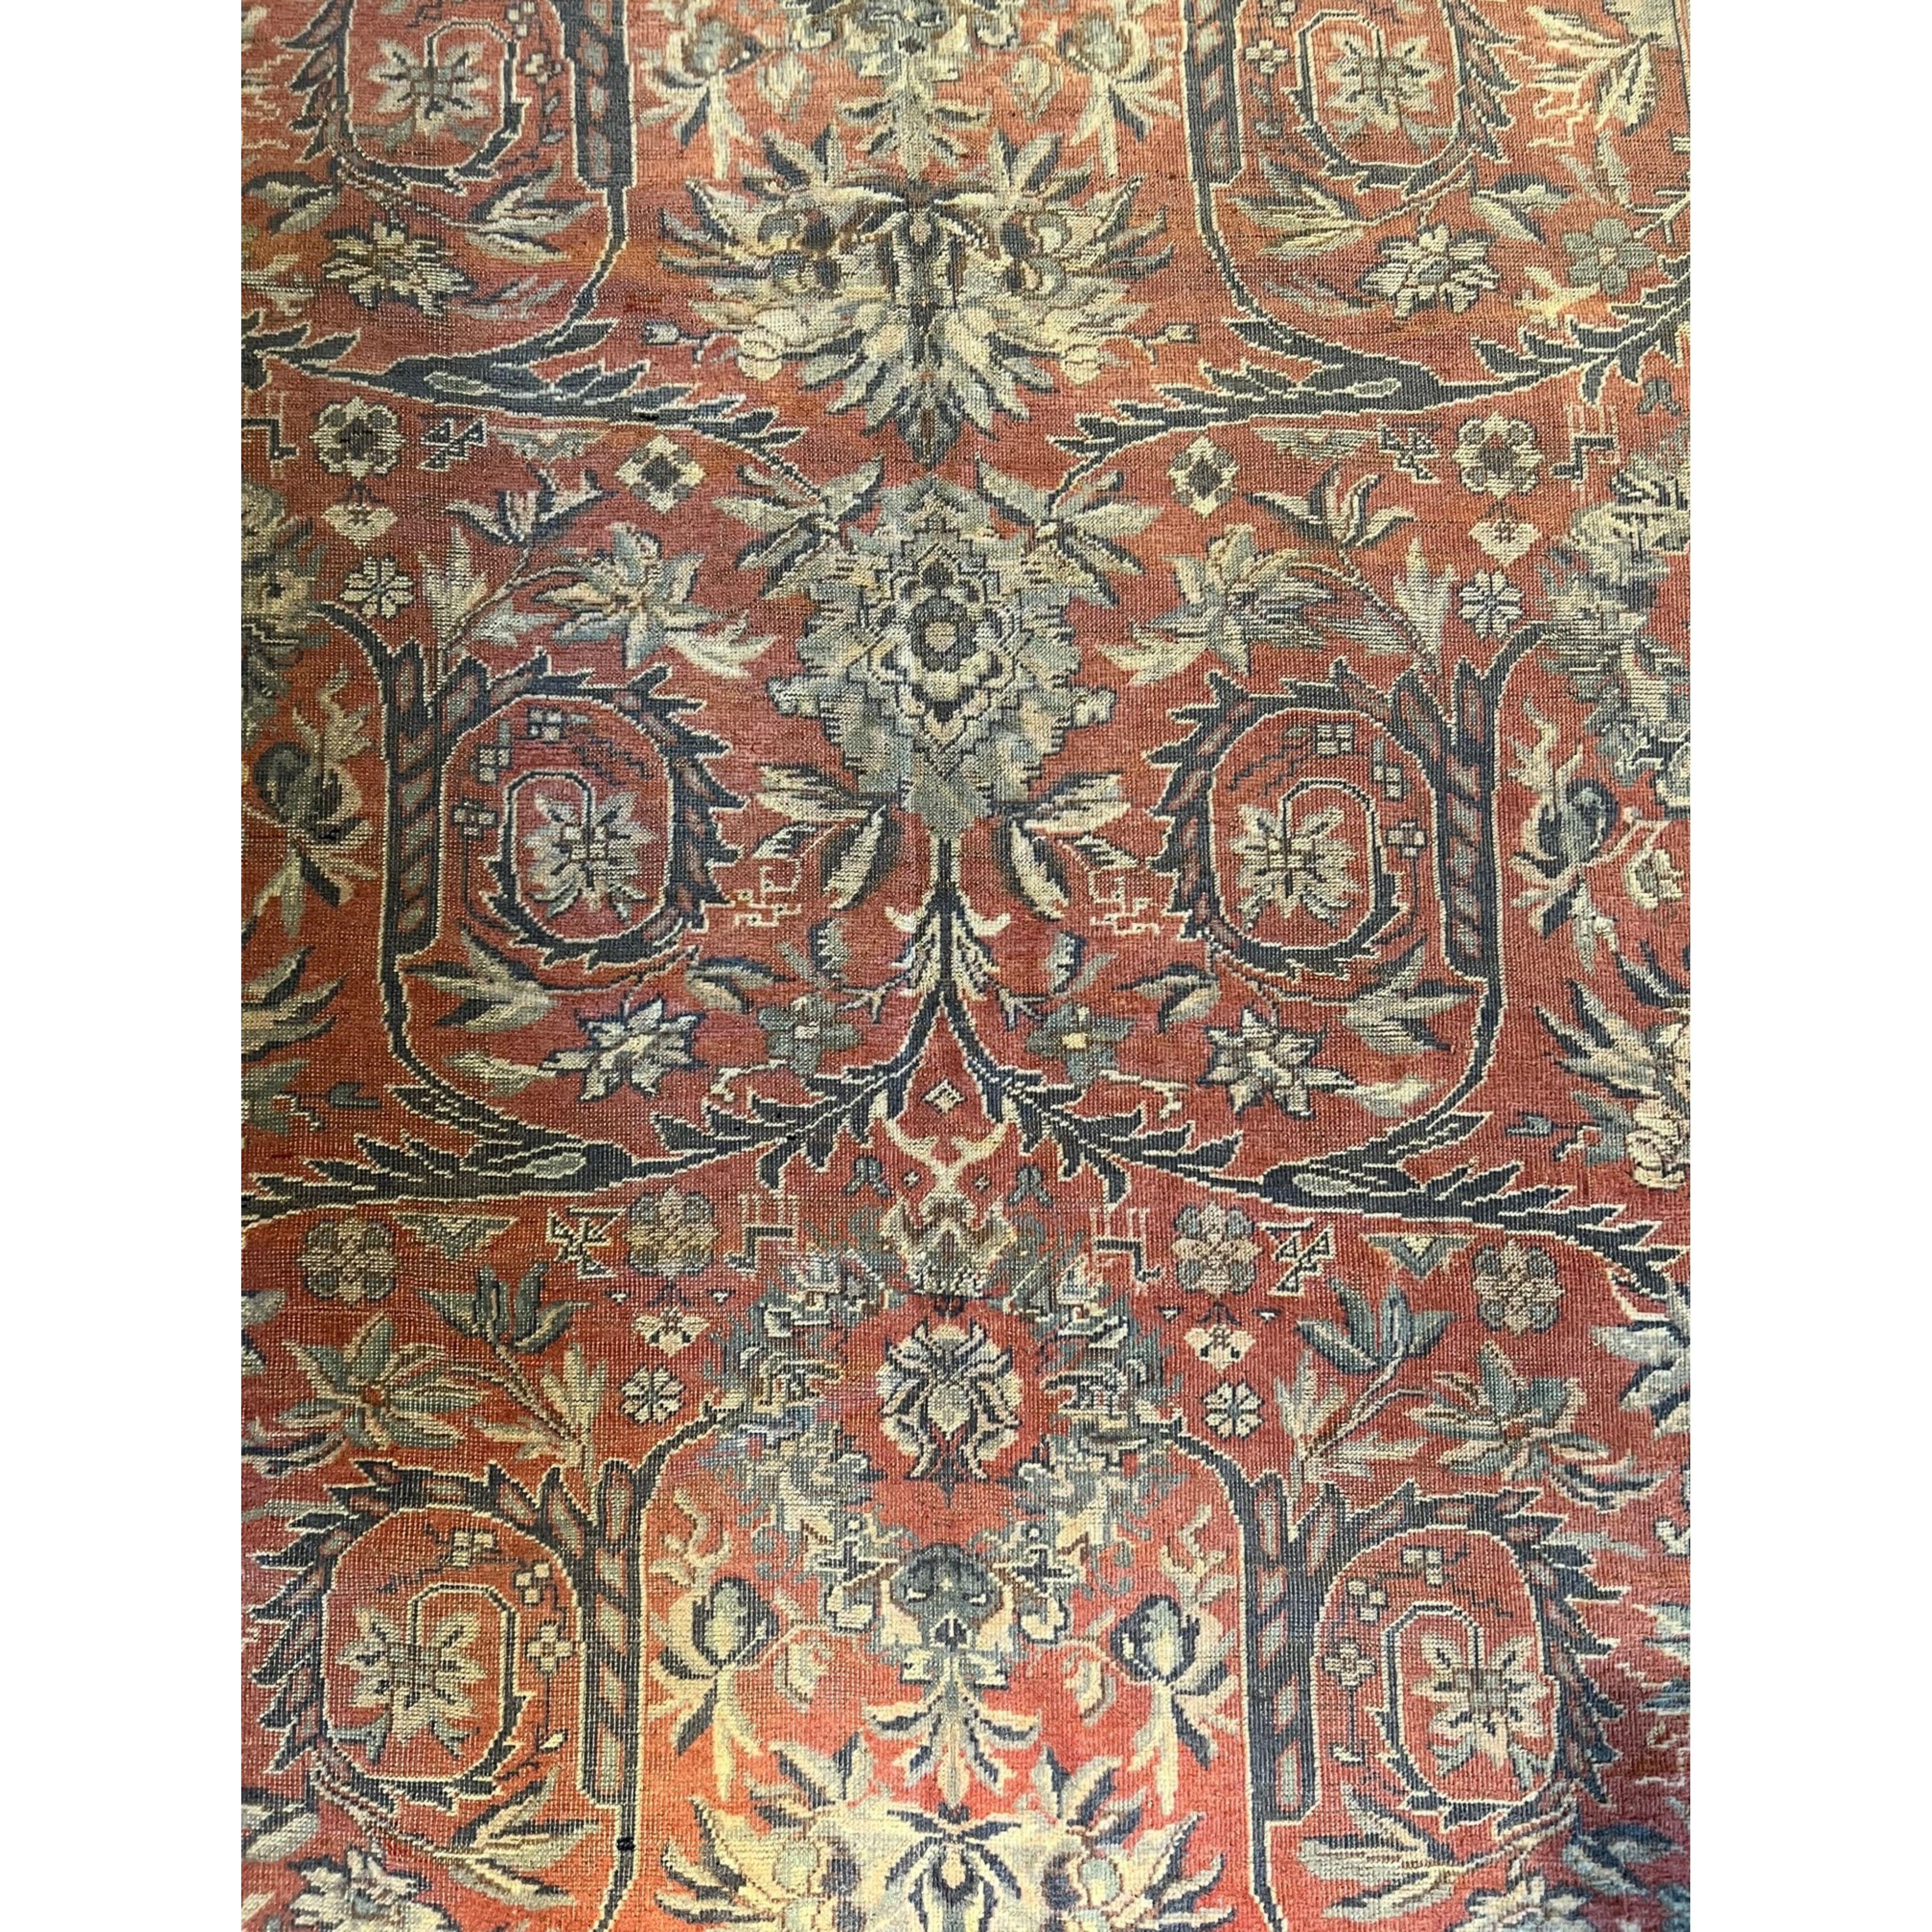 Antique Turkish Rug 10.0x6.6 In Good Condition For Sale In Los Angeles, US